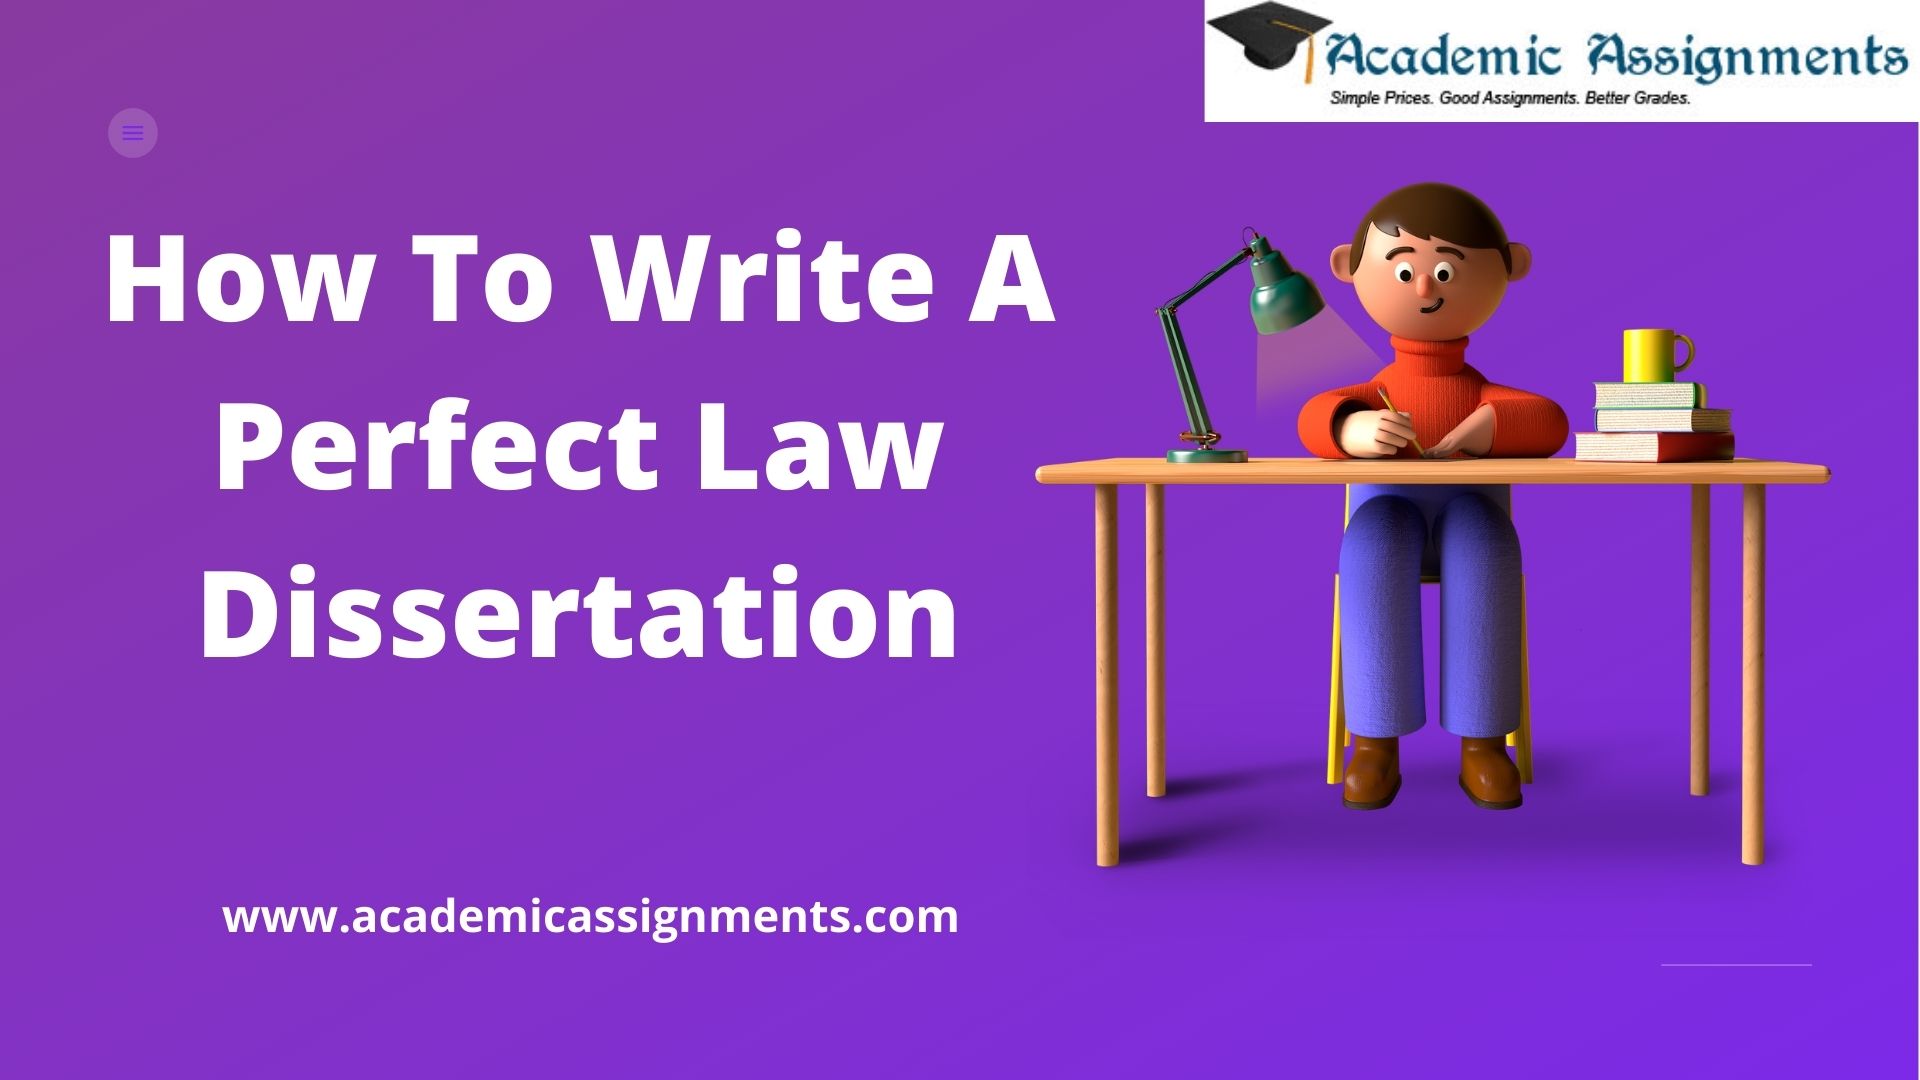 How To Write A Perfect Law Dissertation